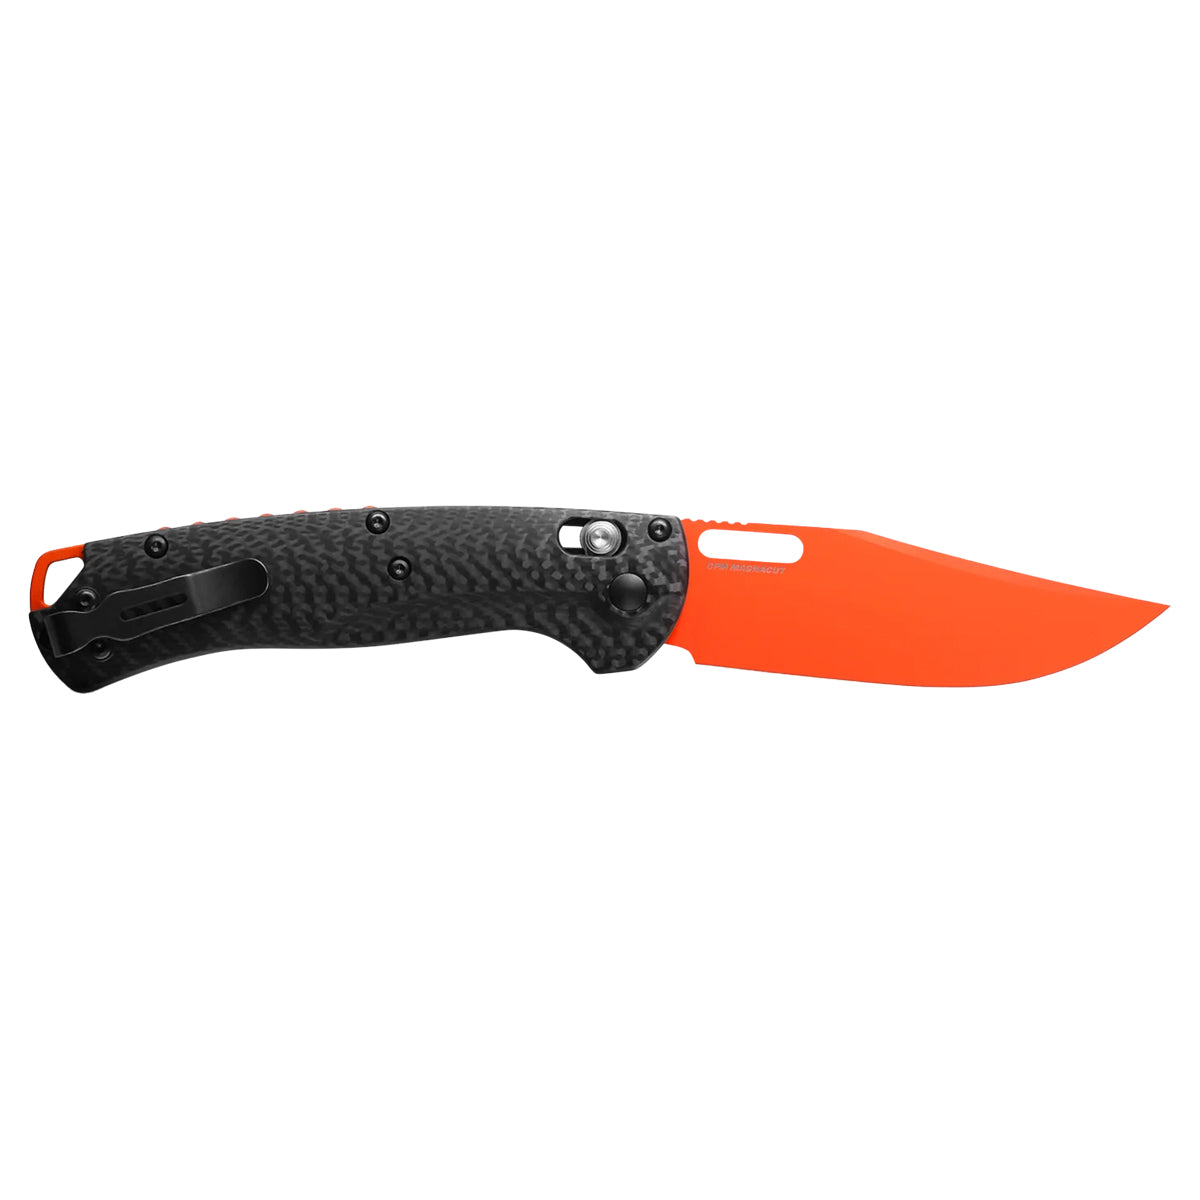 Benchmade Tagged Out Knife in  by GOHUNT | Benchmade - GOHUNT Shop